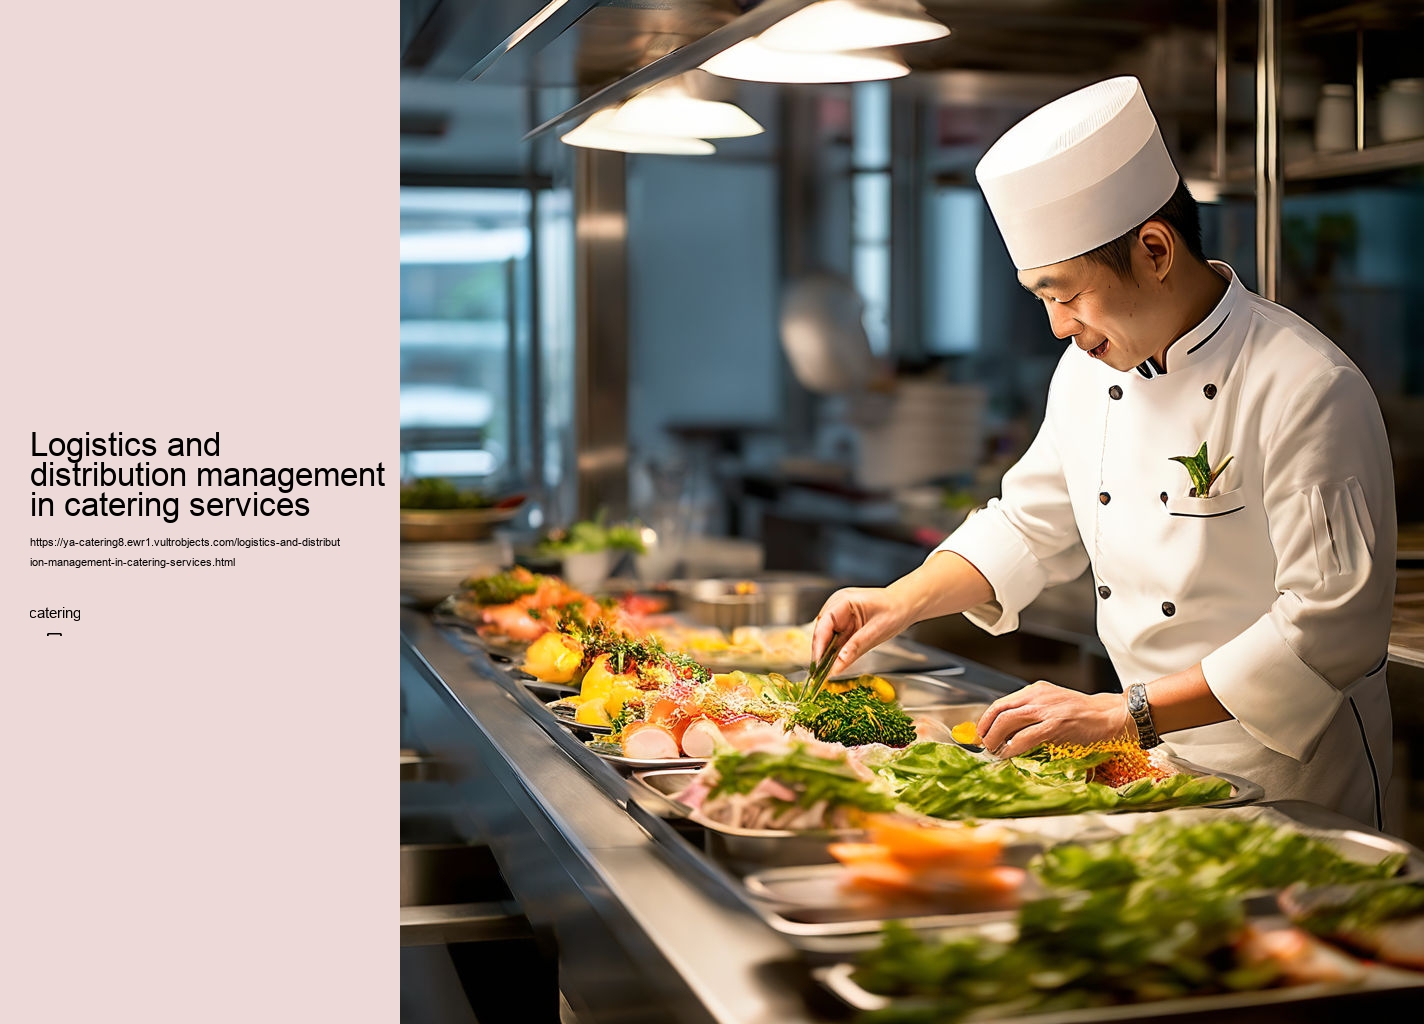 Logistics and distribution management in catering services